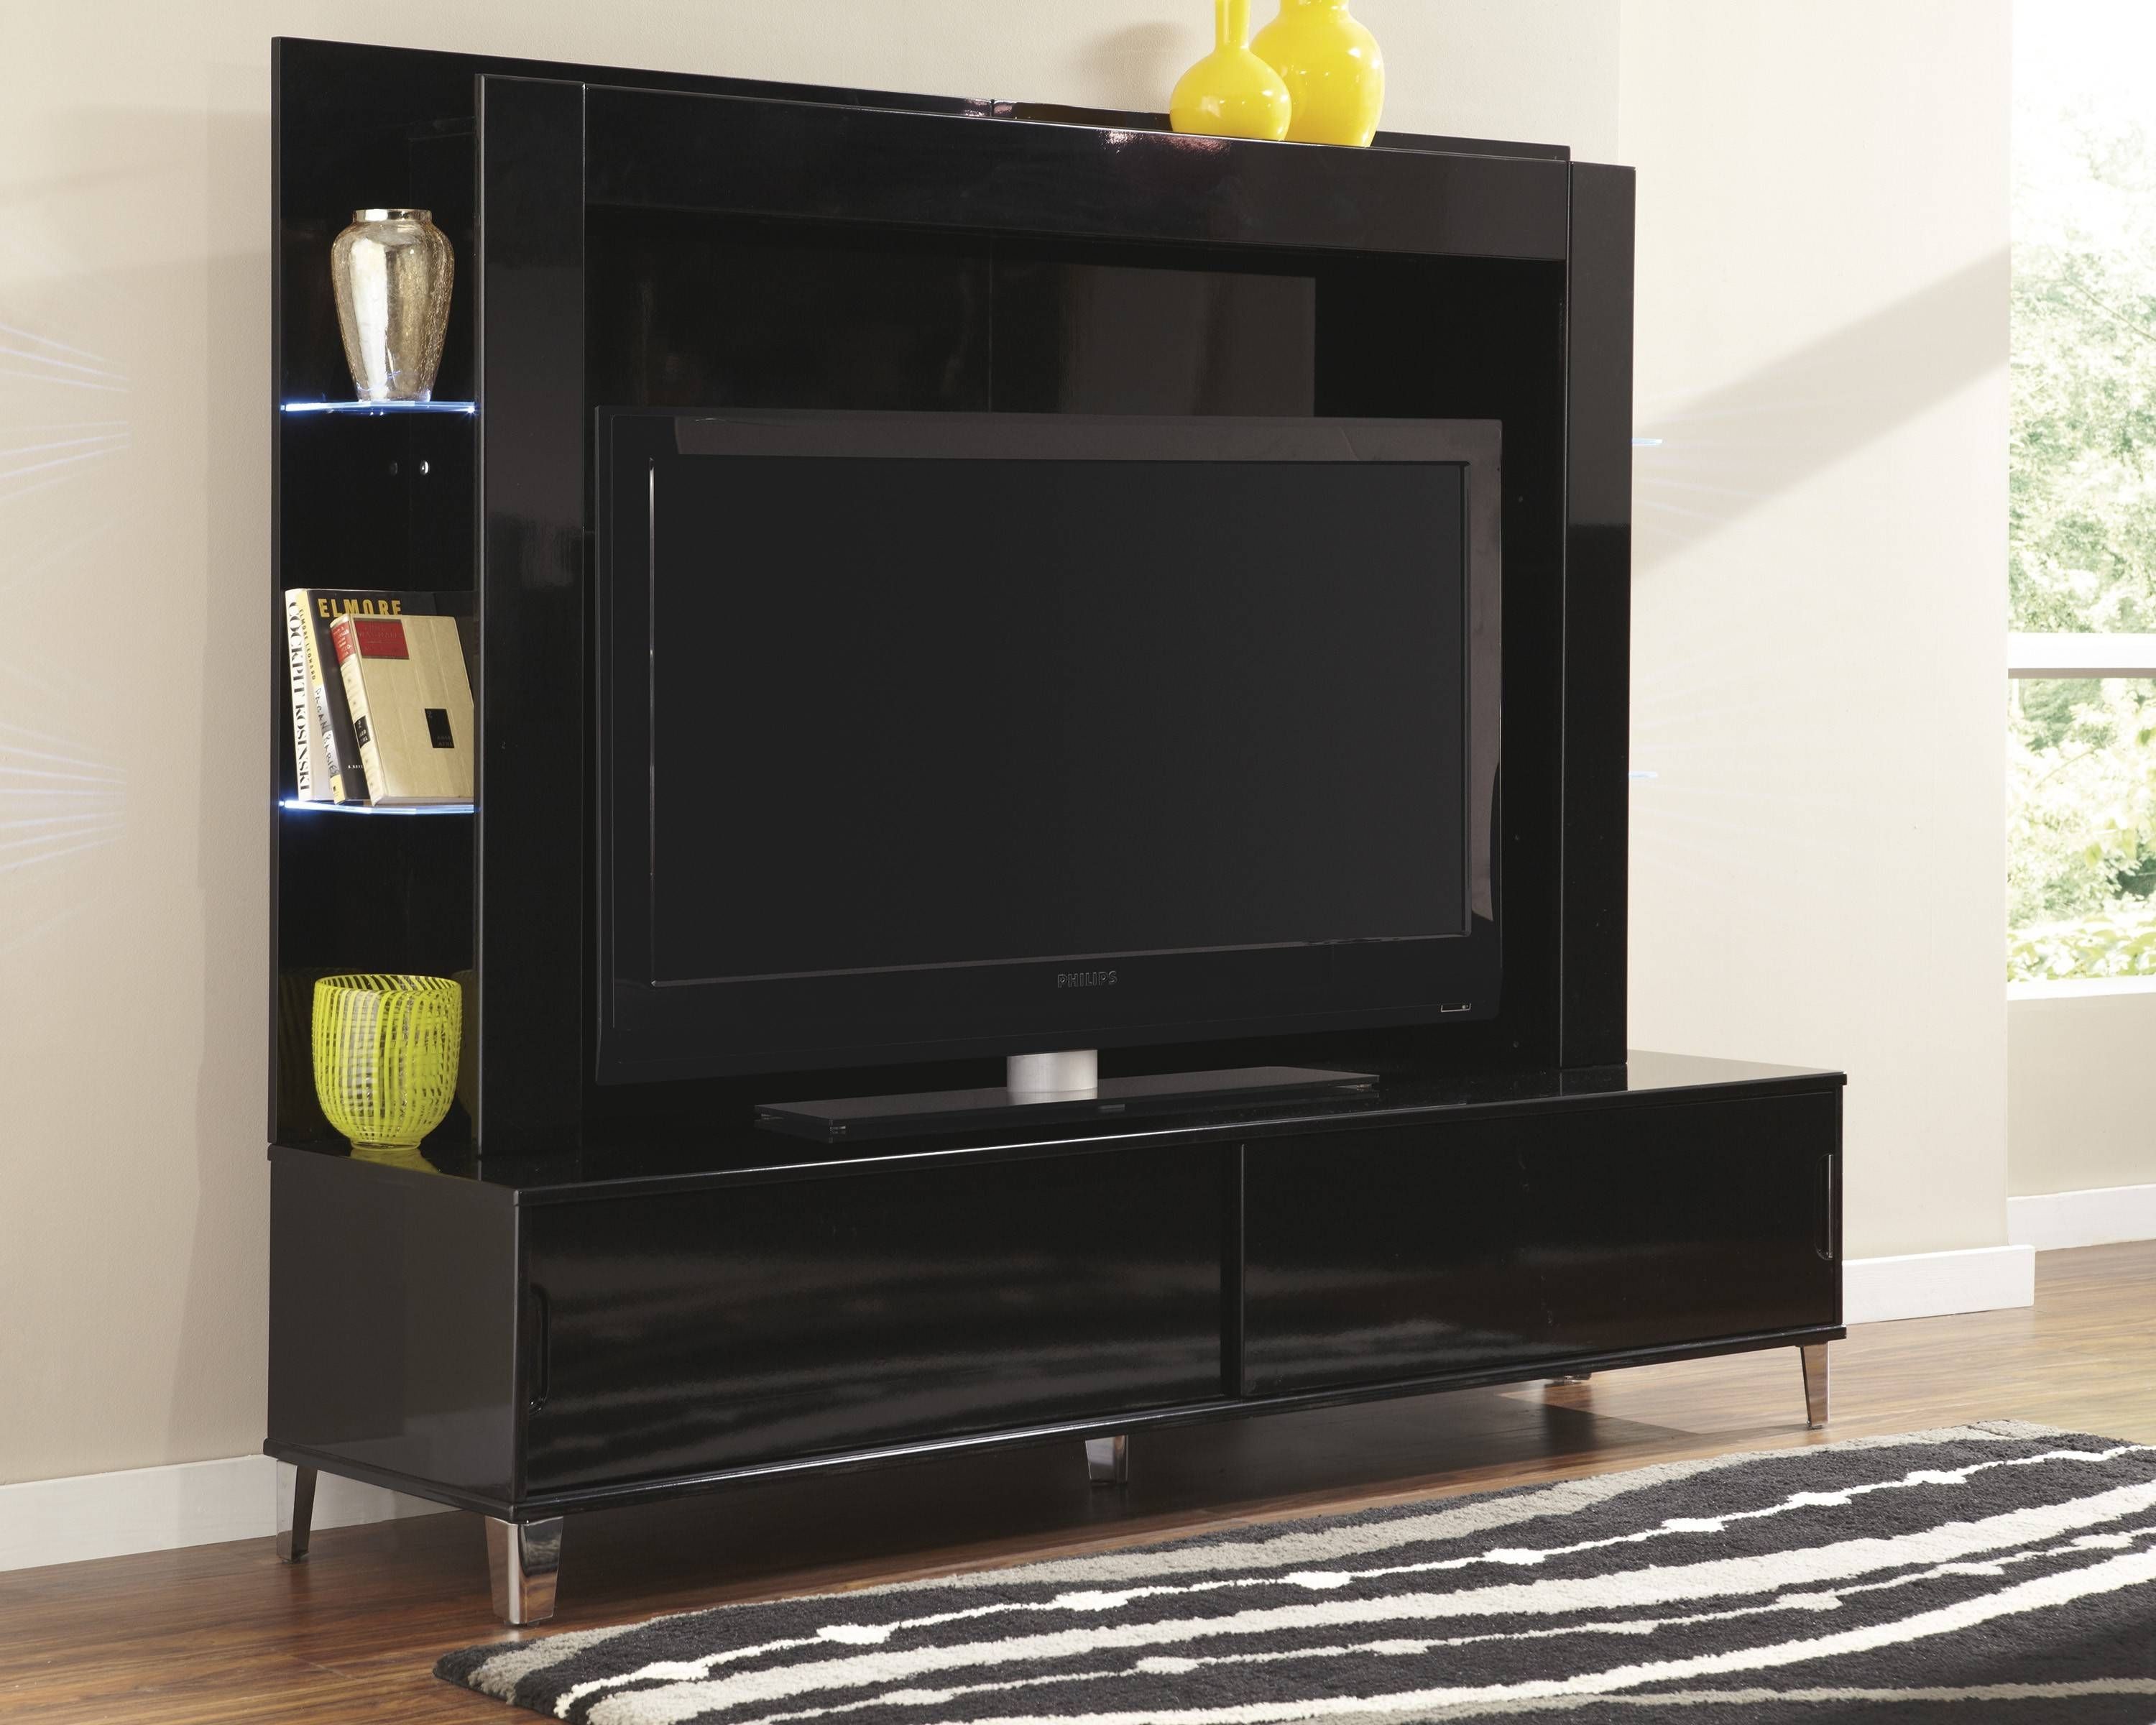 Furniture Tv Armoire, Modern Tv Cabinet On Tv Wall Units Tv Throughout Small Black Tv Cabinets (View 15 of 15)